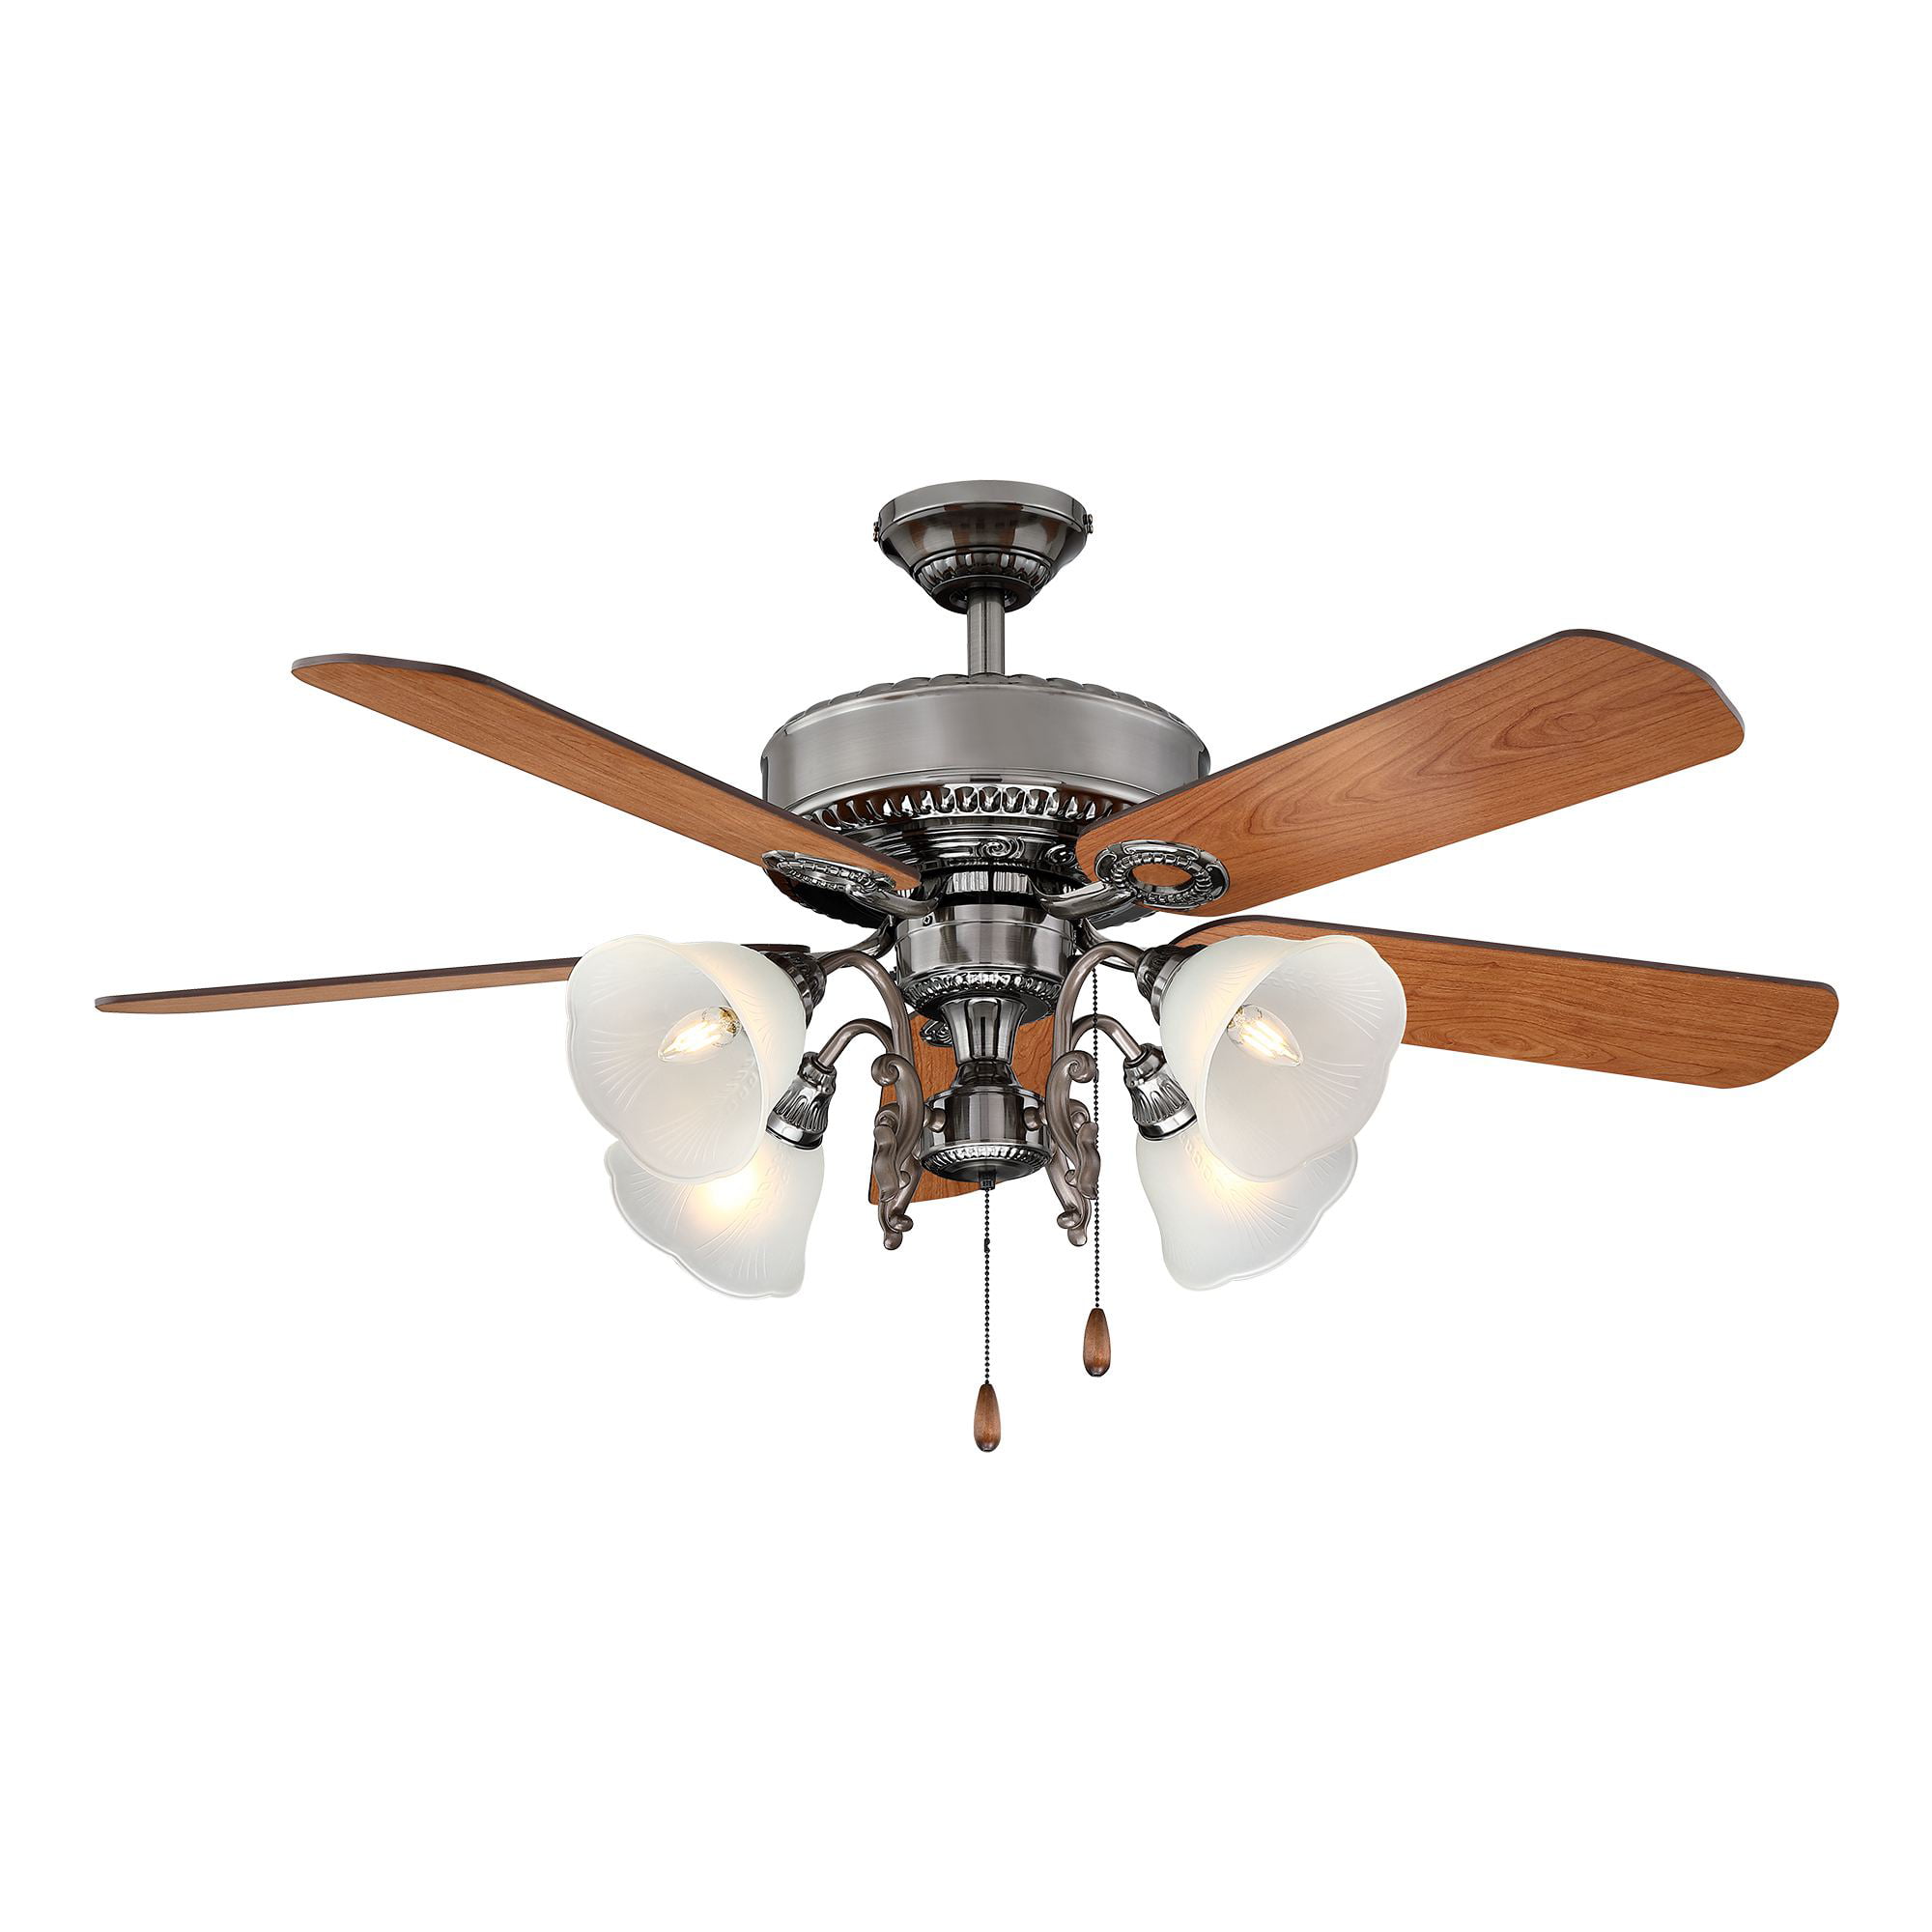 Details about   Farmhouse Ceiling Fan with Pull Chain Low Profile Rustic Wood Blades Grey 52" 